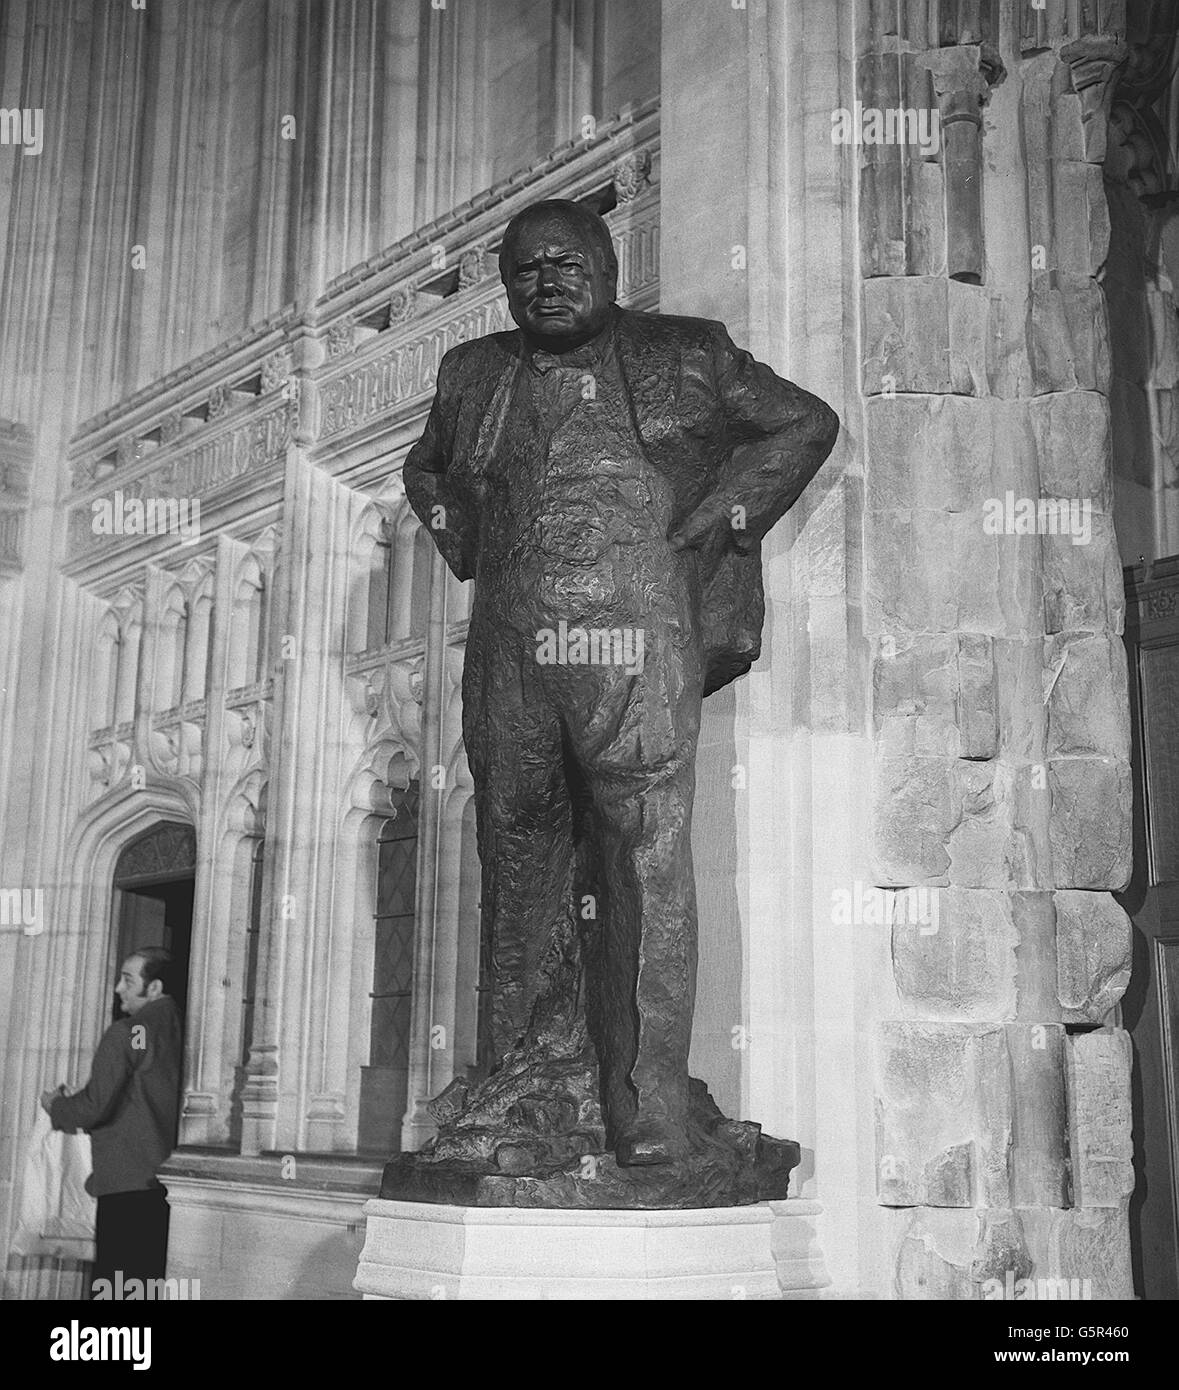 The statue of Sir Winston Churchill which was unveiled in the Members' Lobby of the House of Commons. The bronze statue, by Oscar Nemon, is 7 ft. 5 in. high and stands on a 3 ft. 5 in. plinth. * ... It has been placed beside the Churchill Arch, the Members' entrance to the Chamber, opposite a statue of Lloyd George. Stock Photo